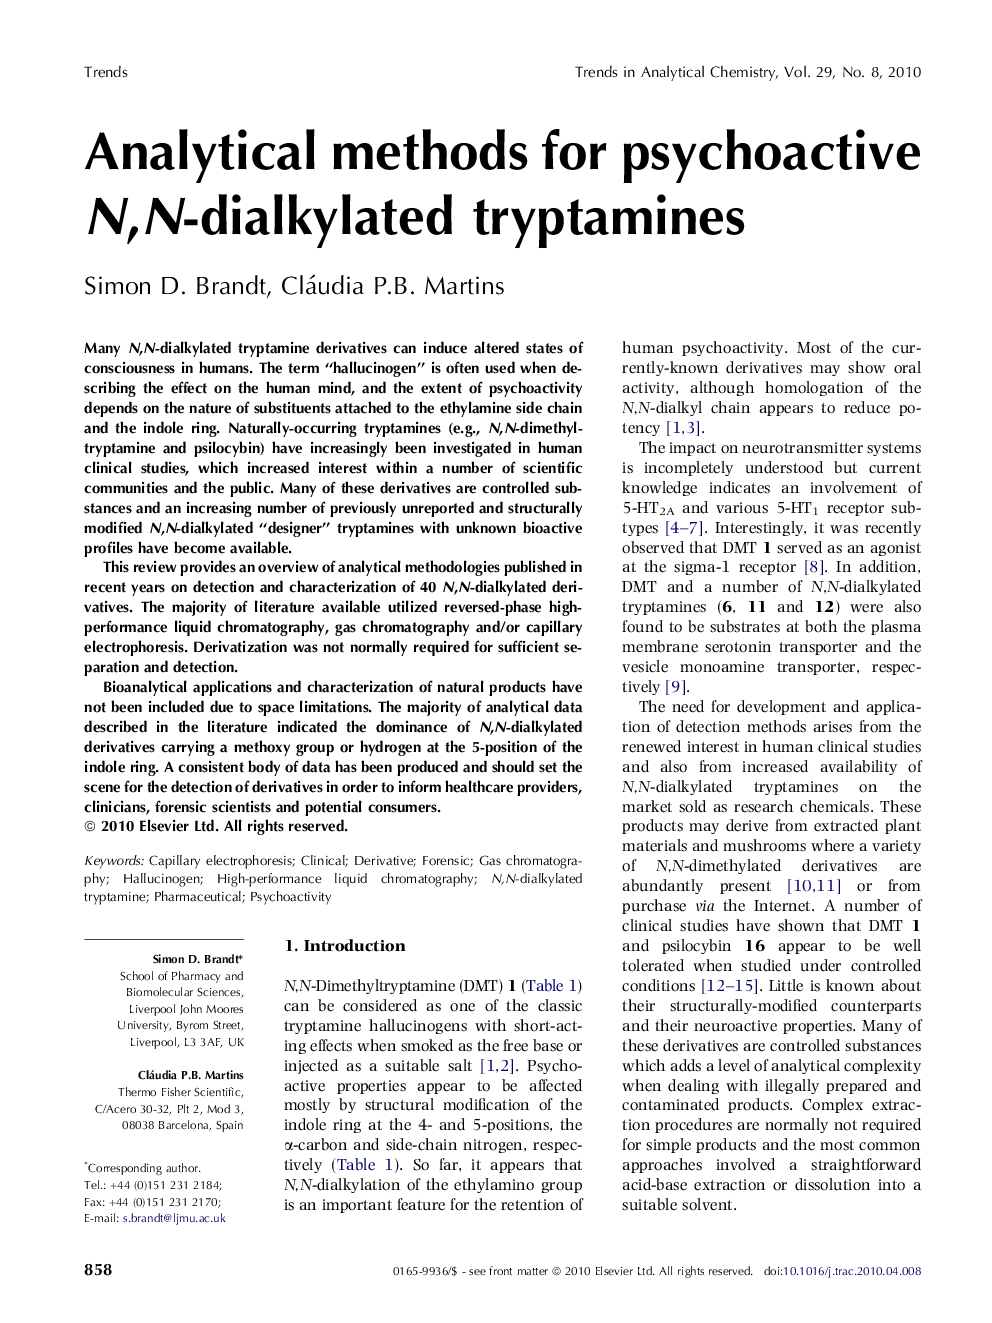 Analytical methods for psychoactive N,N-dialkylated tryptamines